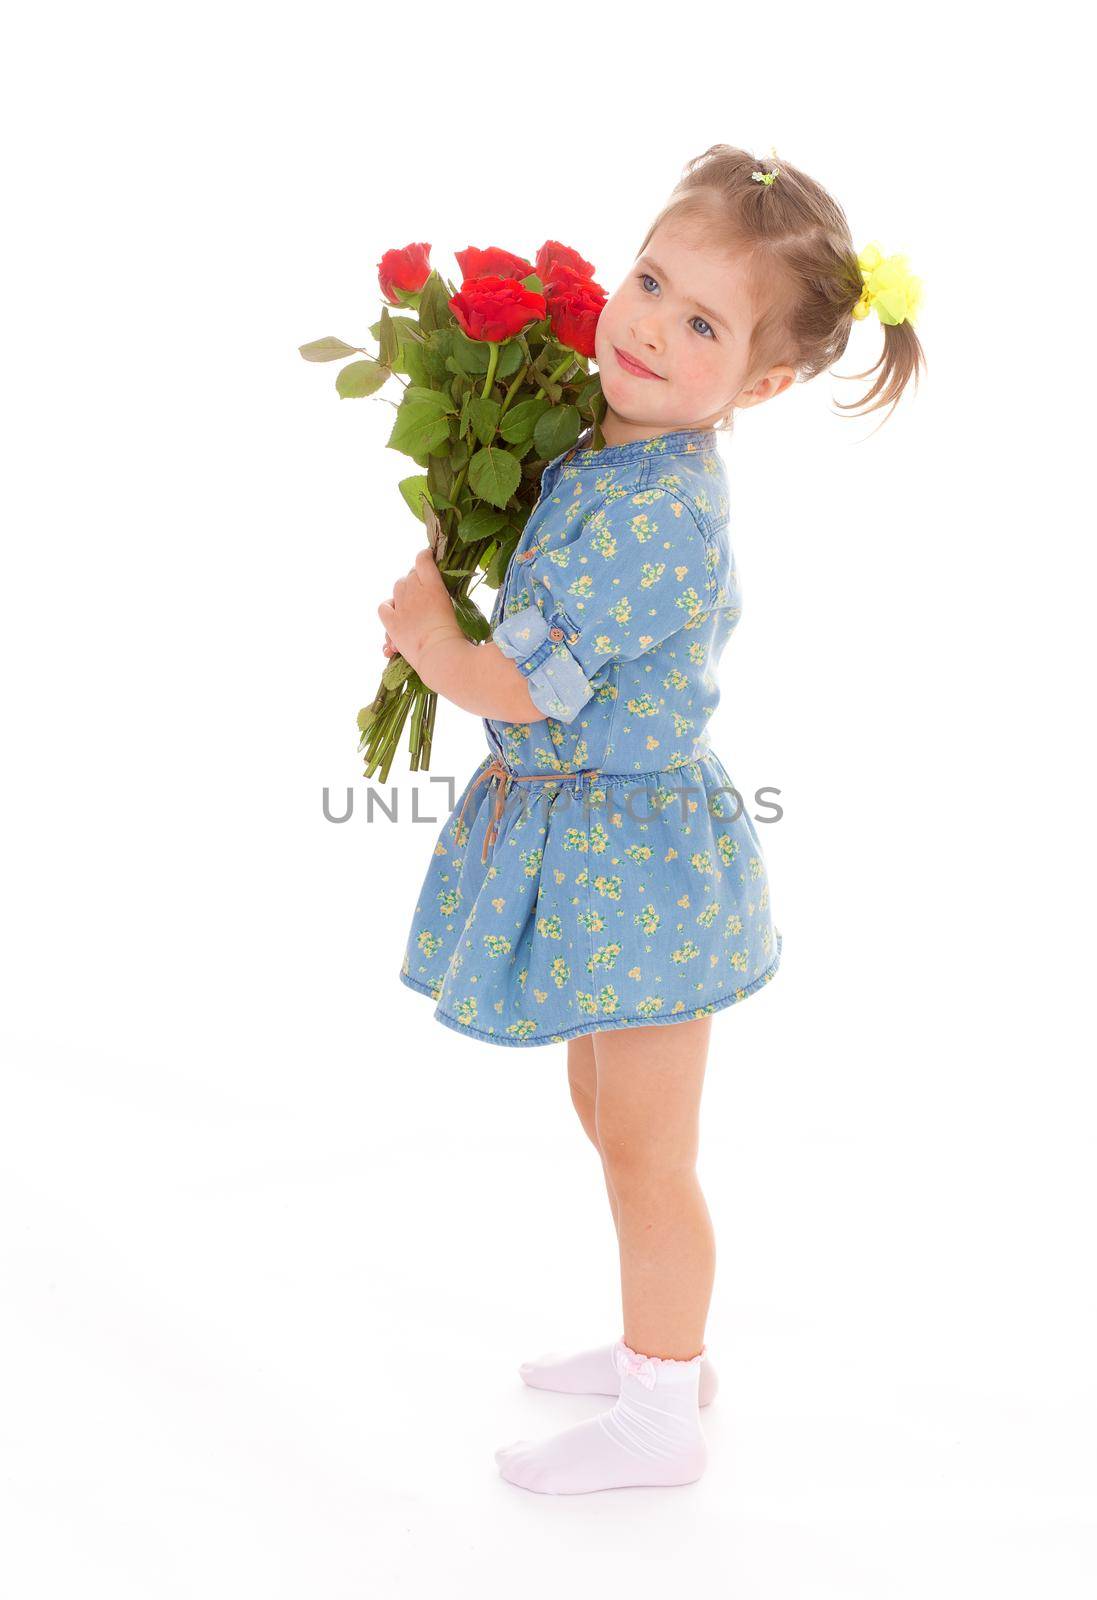 Charming girl in blue dress with a bouquet of red roses